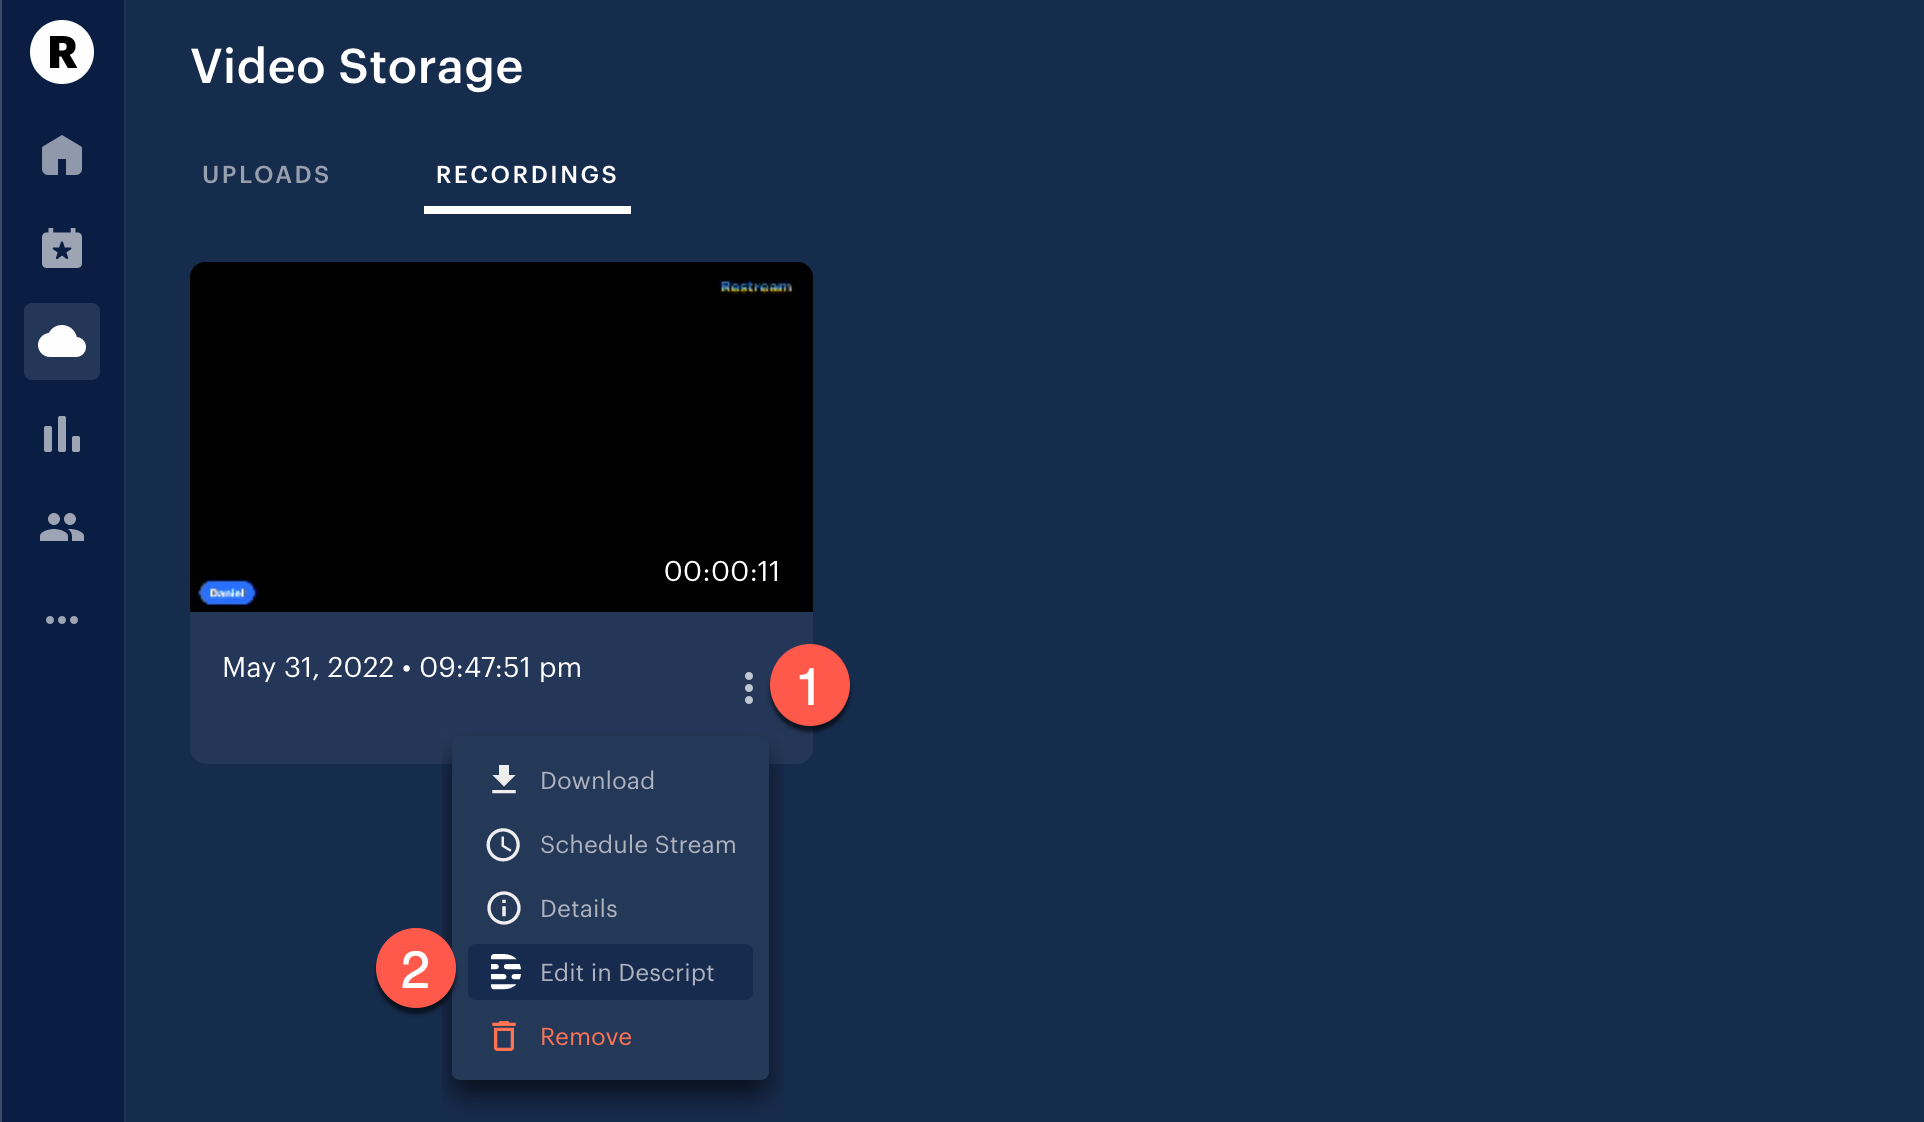 Video_Storage_Page_V03.png